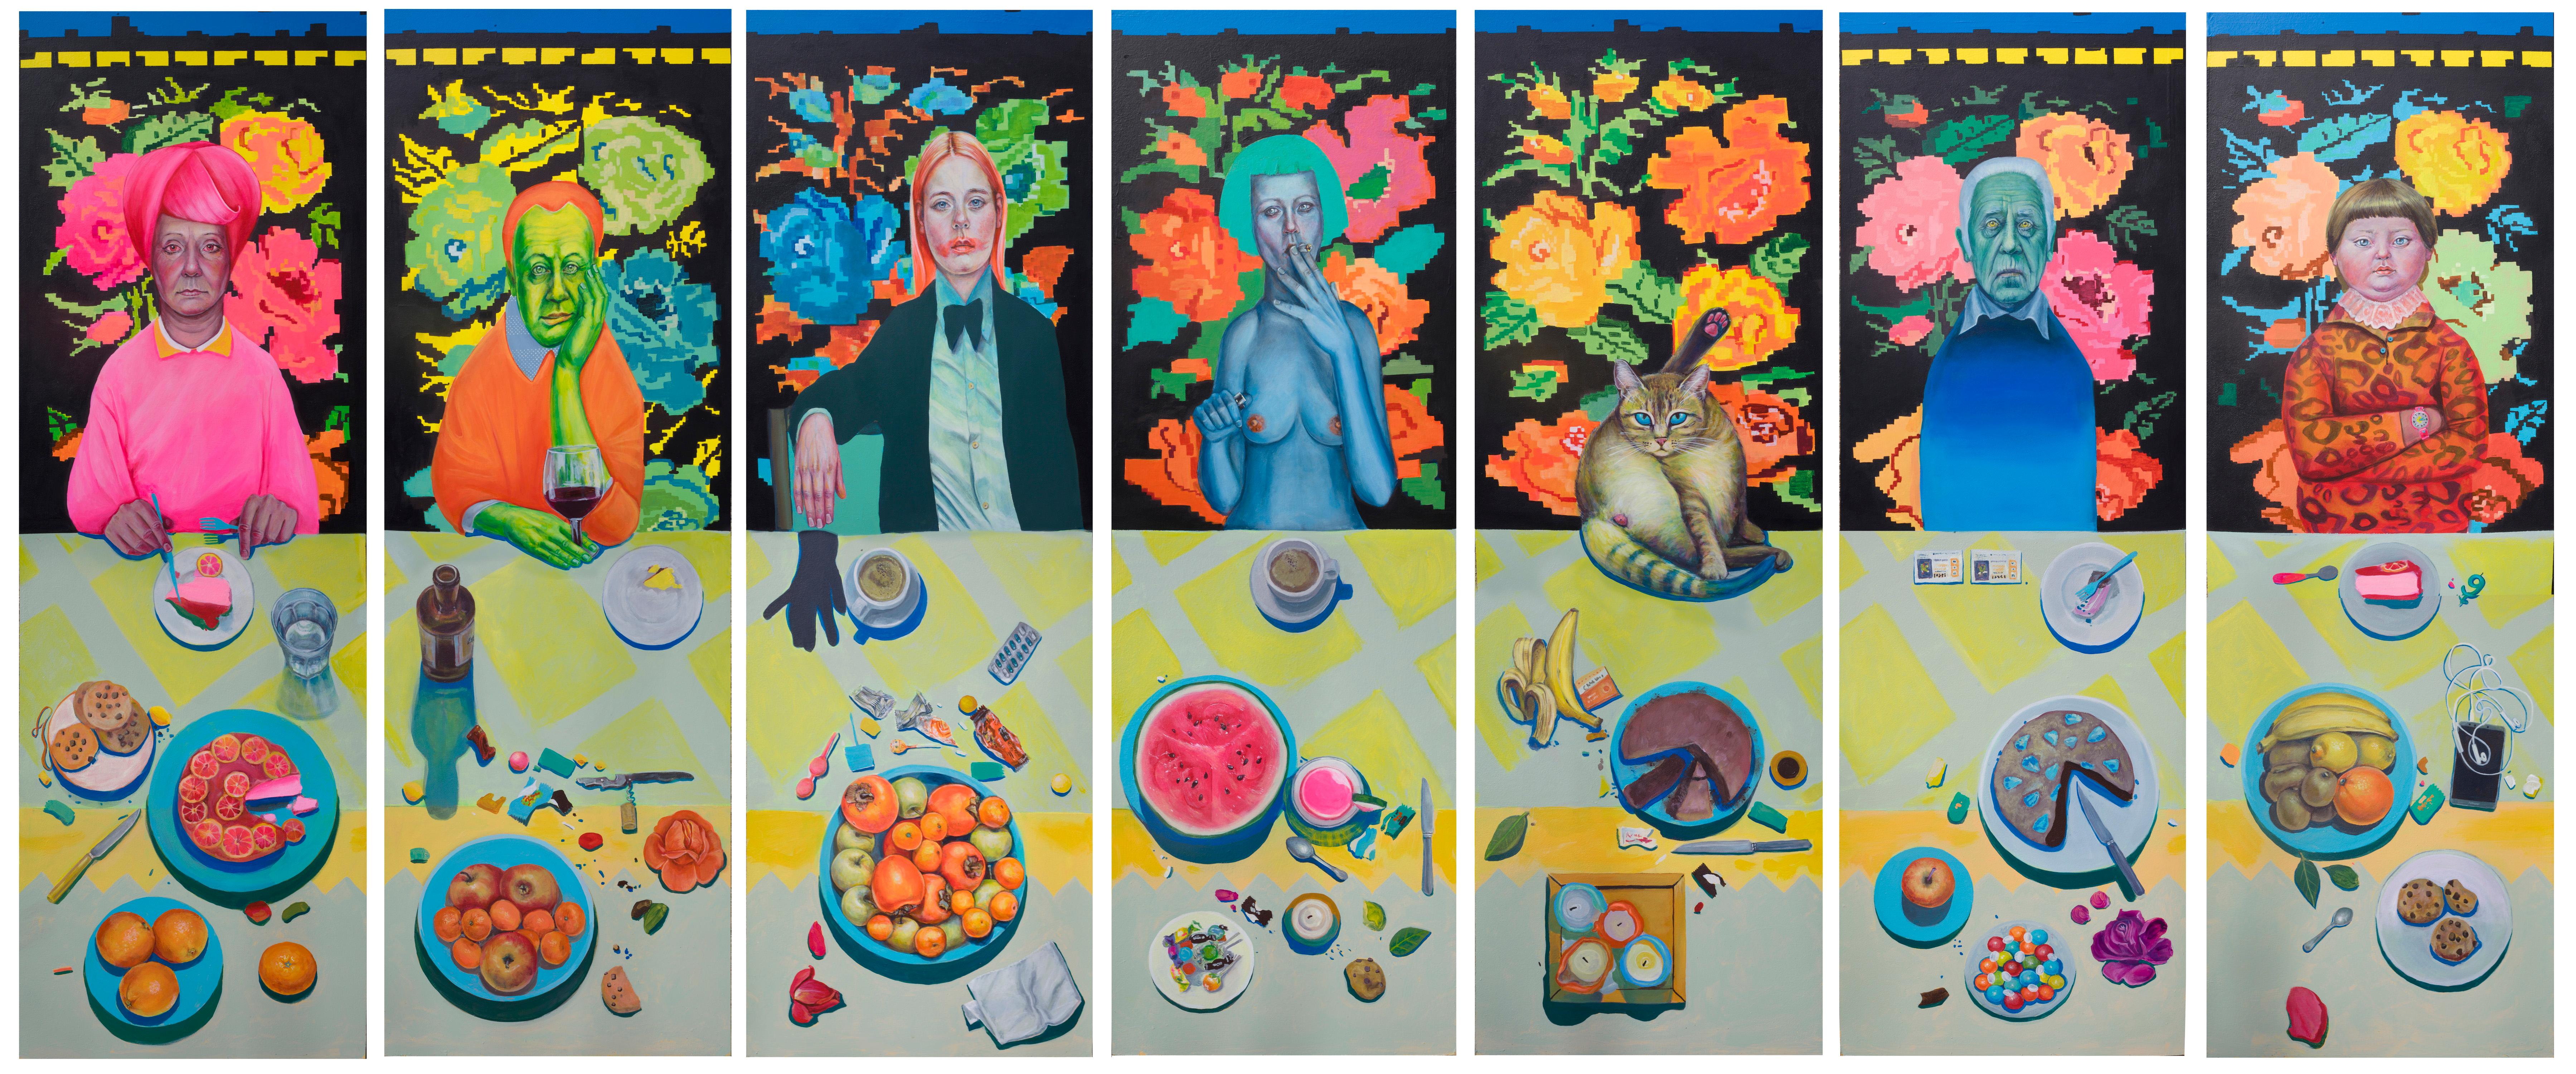 Huge Composition Of 7 Portraits And Still Lifes. 9/25 Limited Edition on Dibond